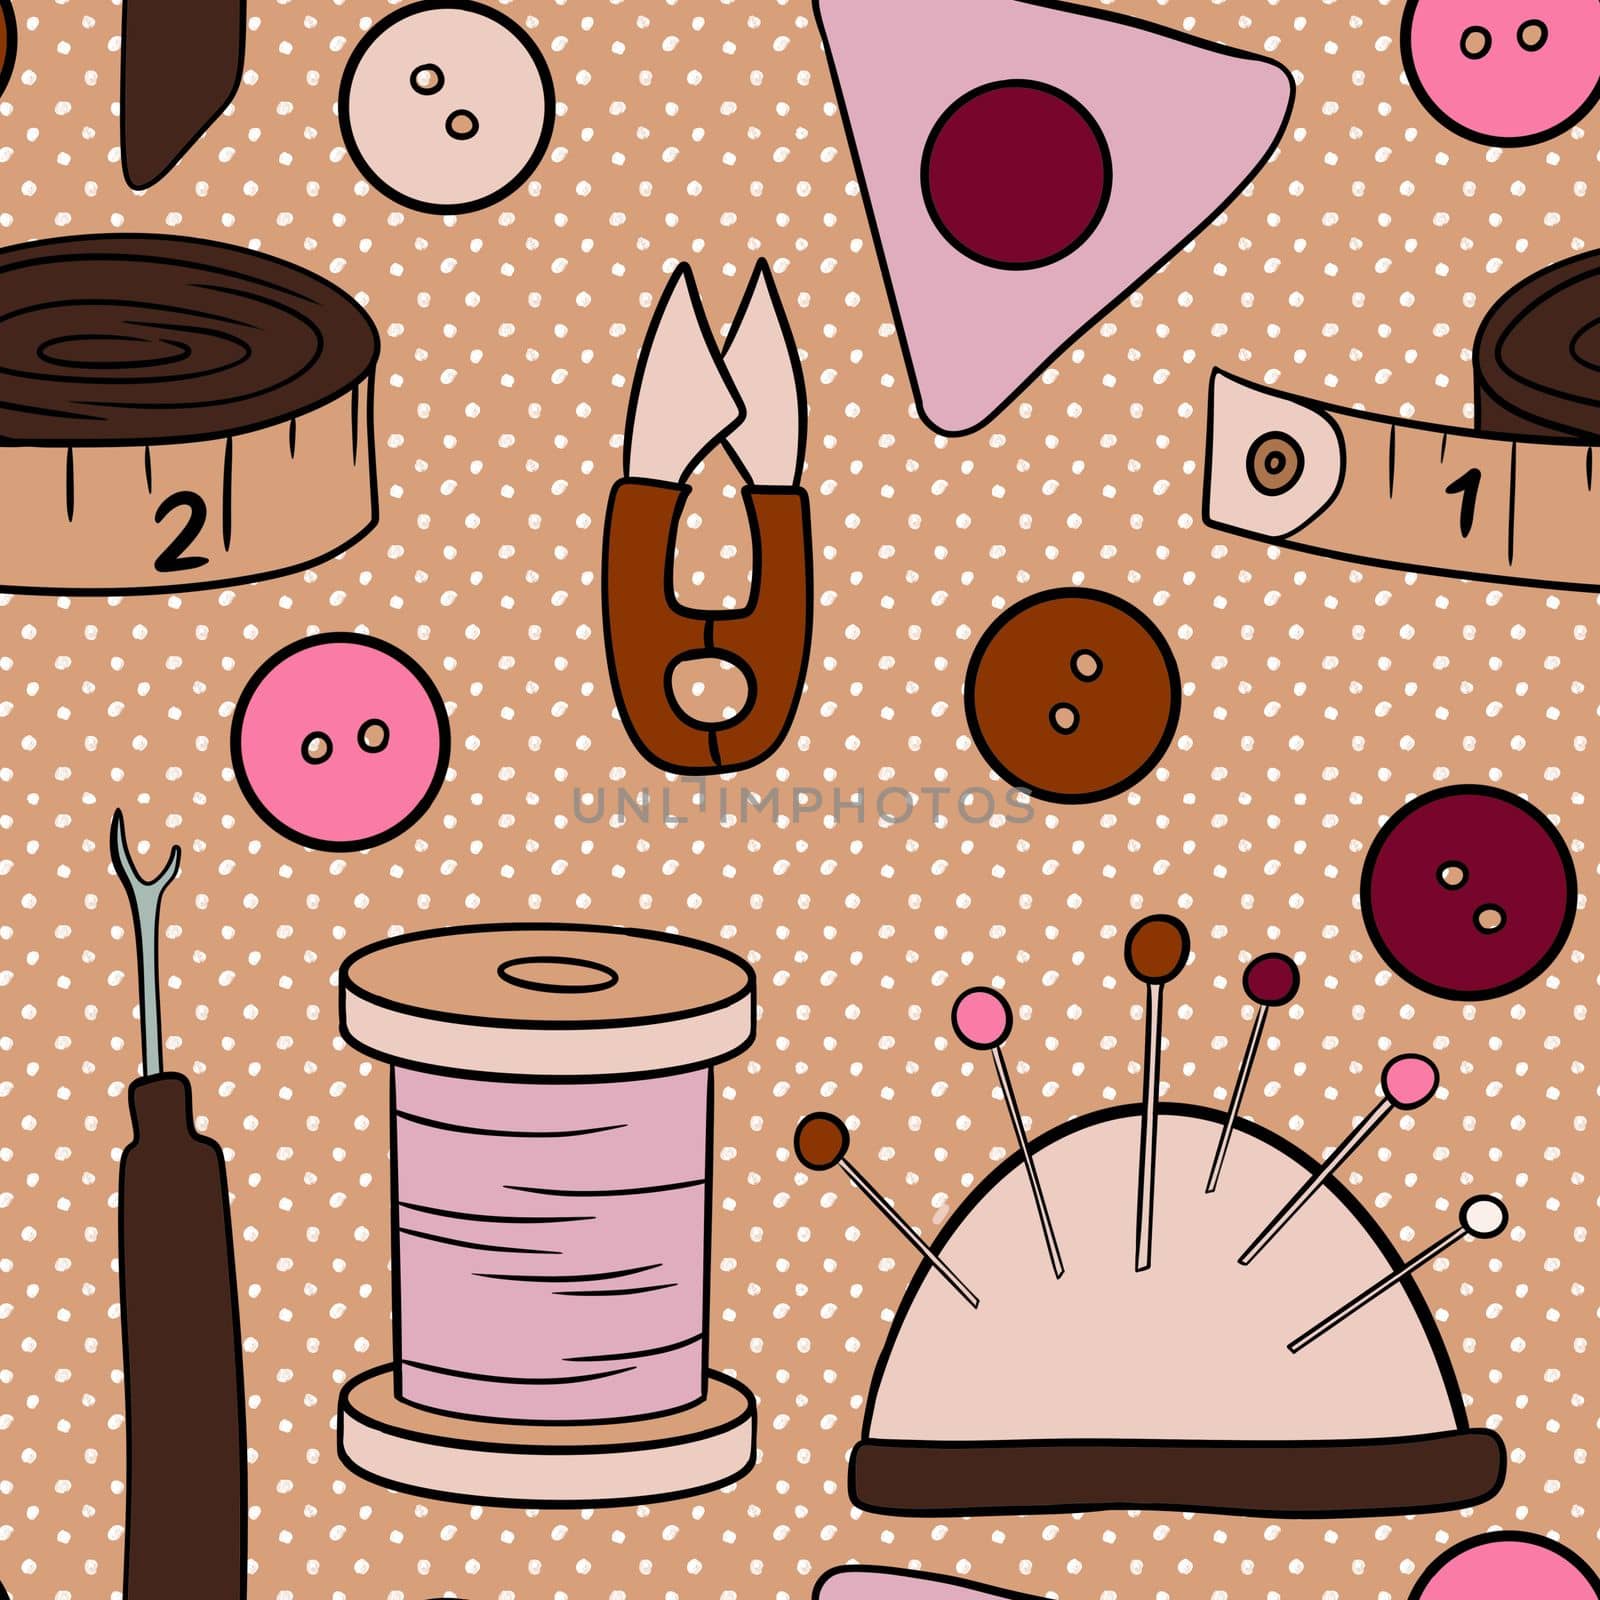 Hand drawn seamless pattern with thread needle tape button sewing crafts dressmaking items. Pink brown beige polka dot background, tailor cute sew print, handmade needwork business hobby, fabric handcraft design. by Lagmar